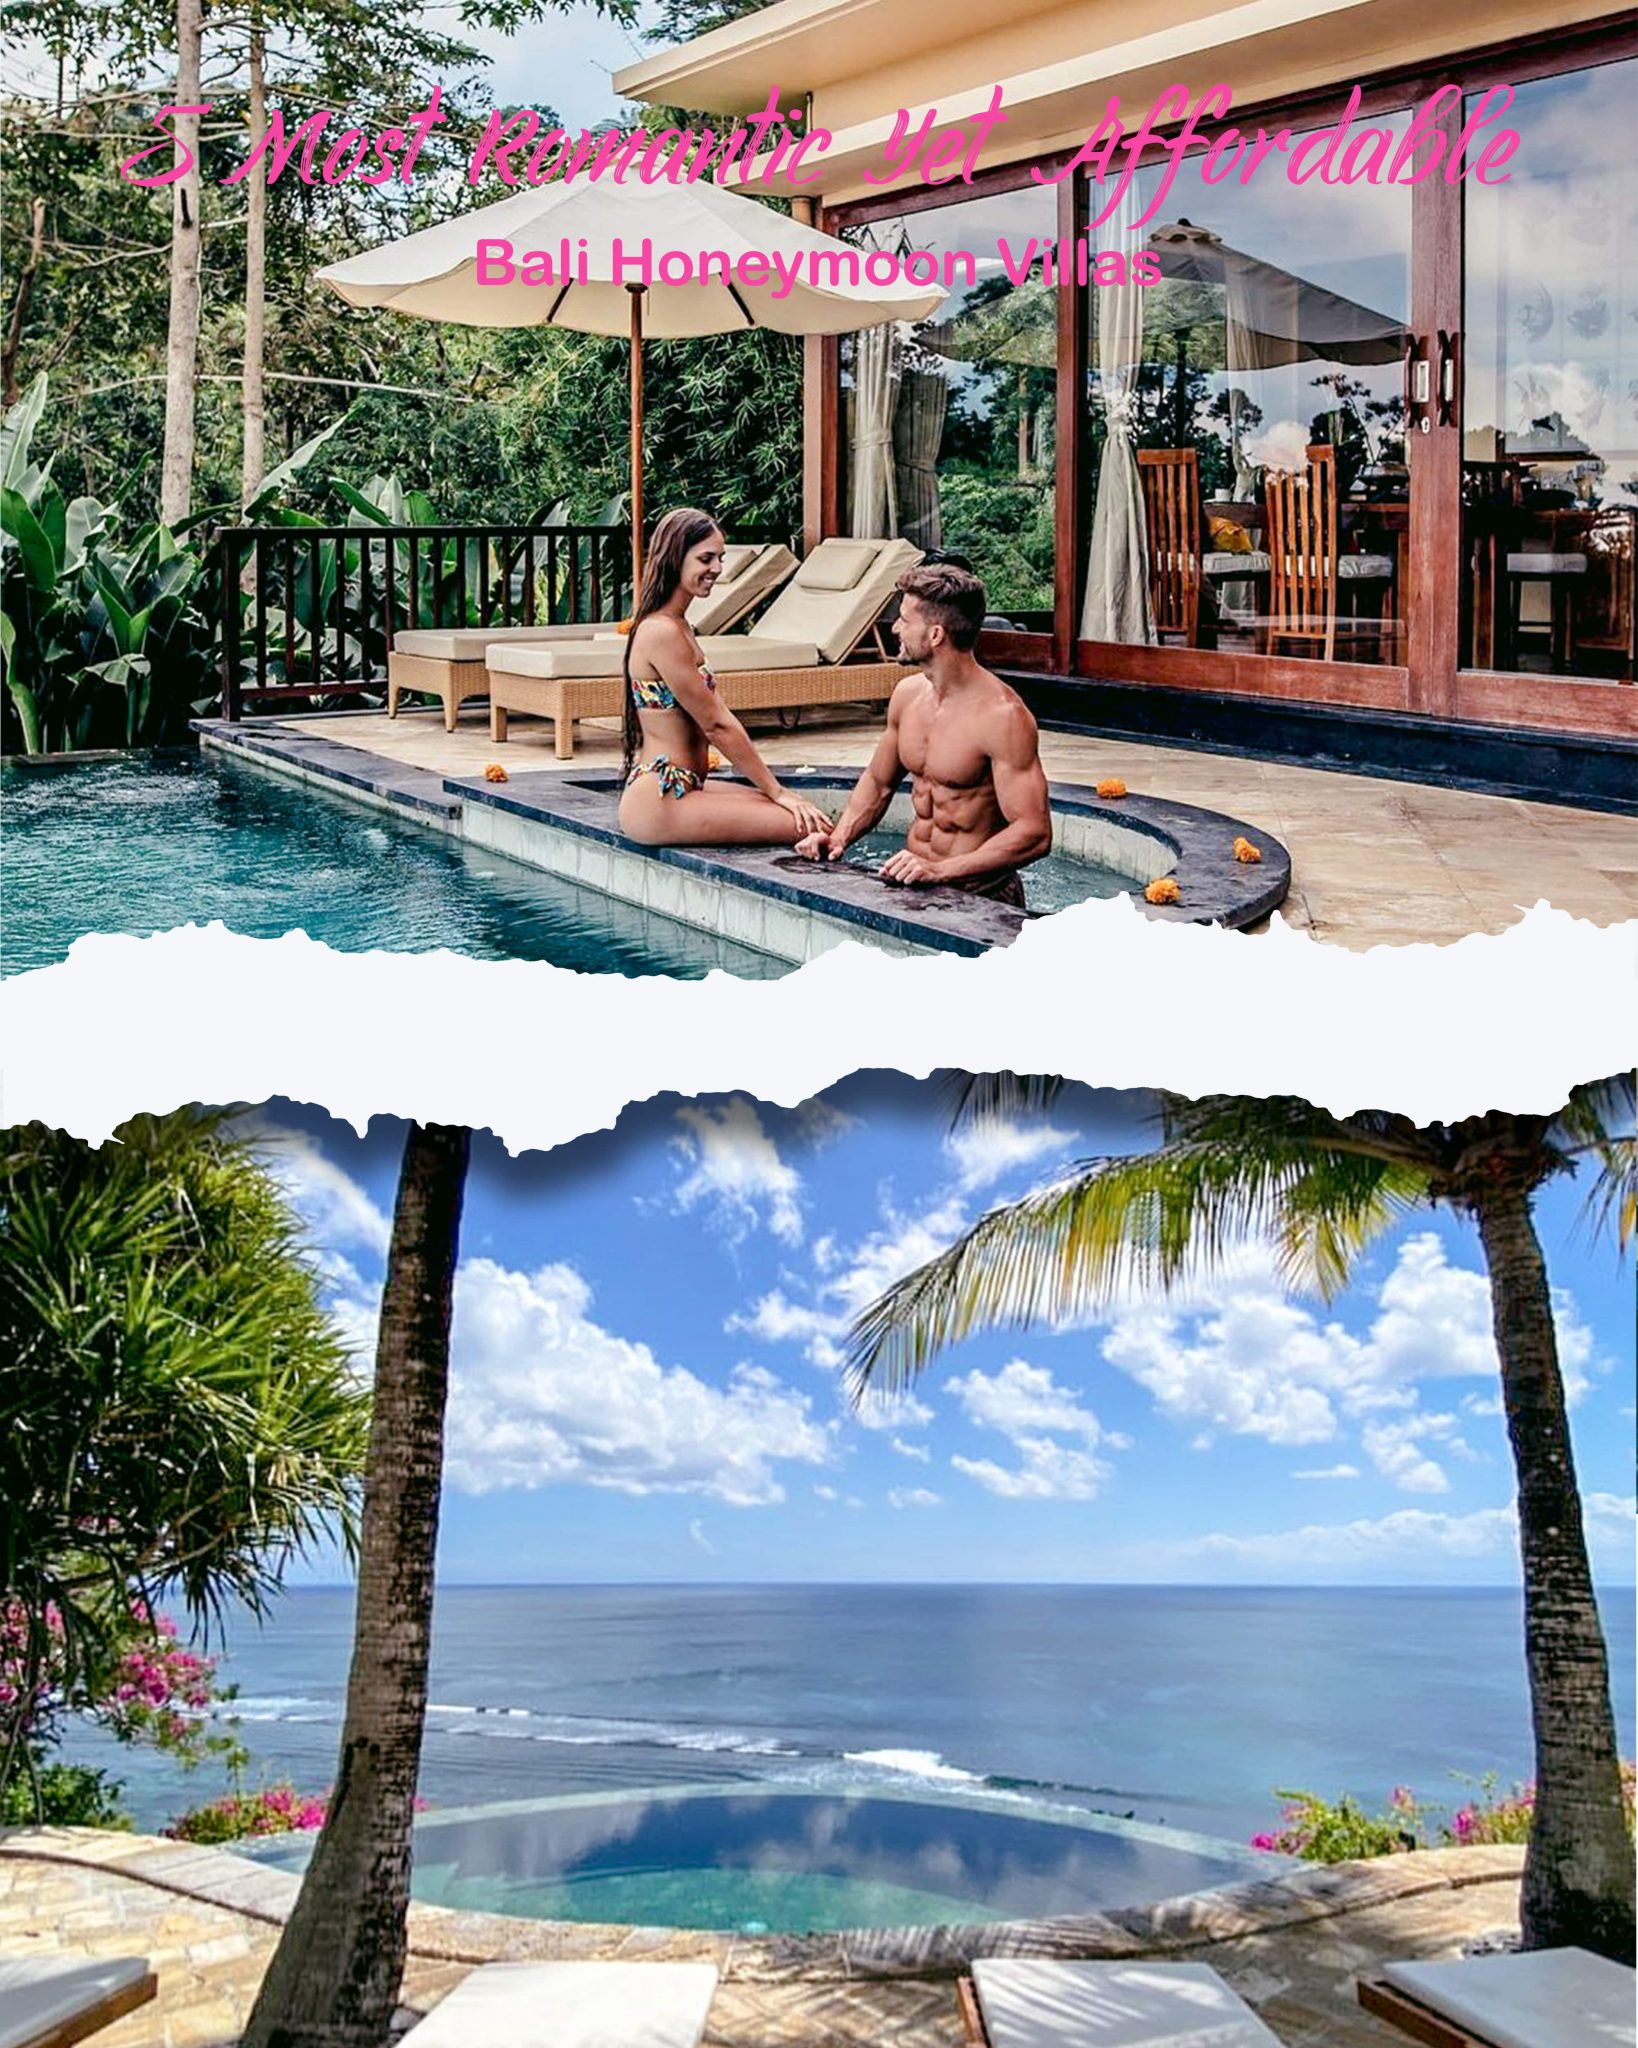 5 Most Romantic Yet Affordable Bali Honeymoon Villas Experience Bali With The Best Tour